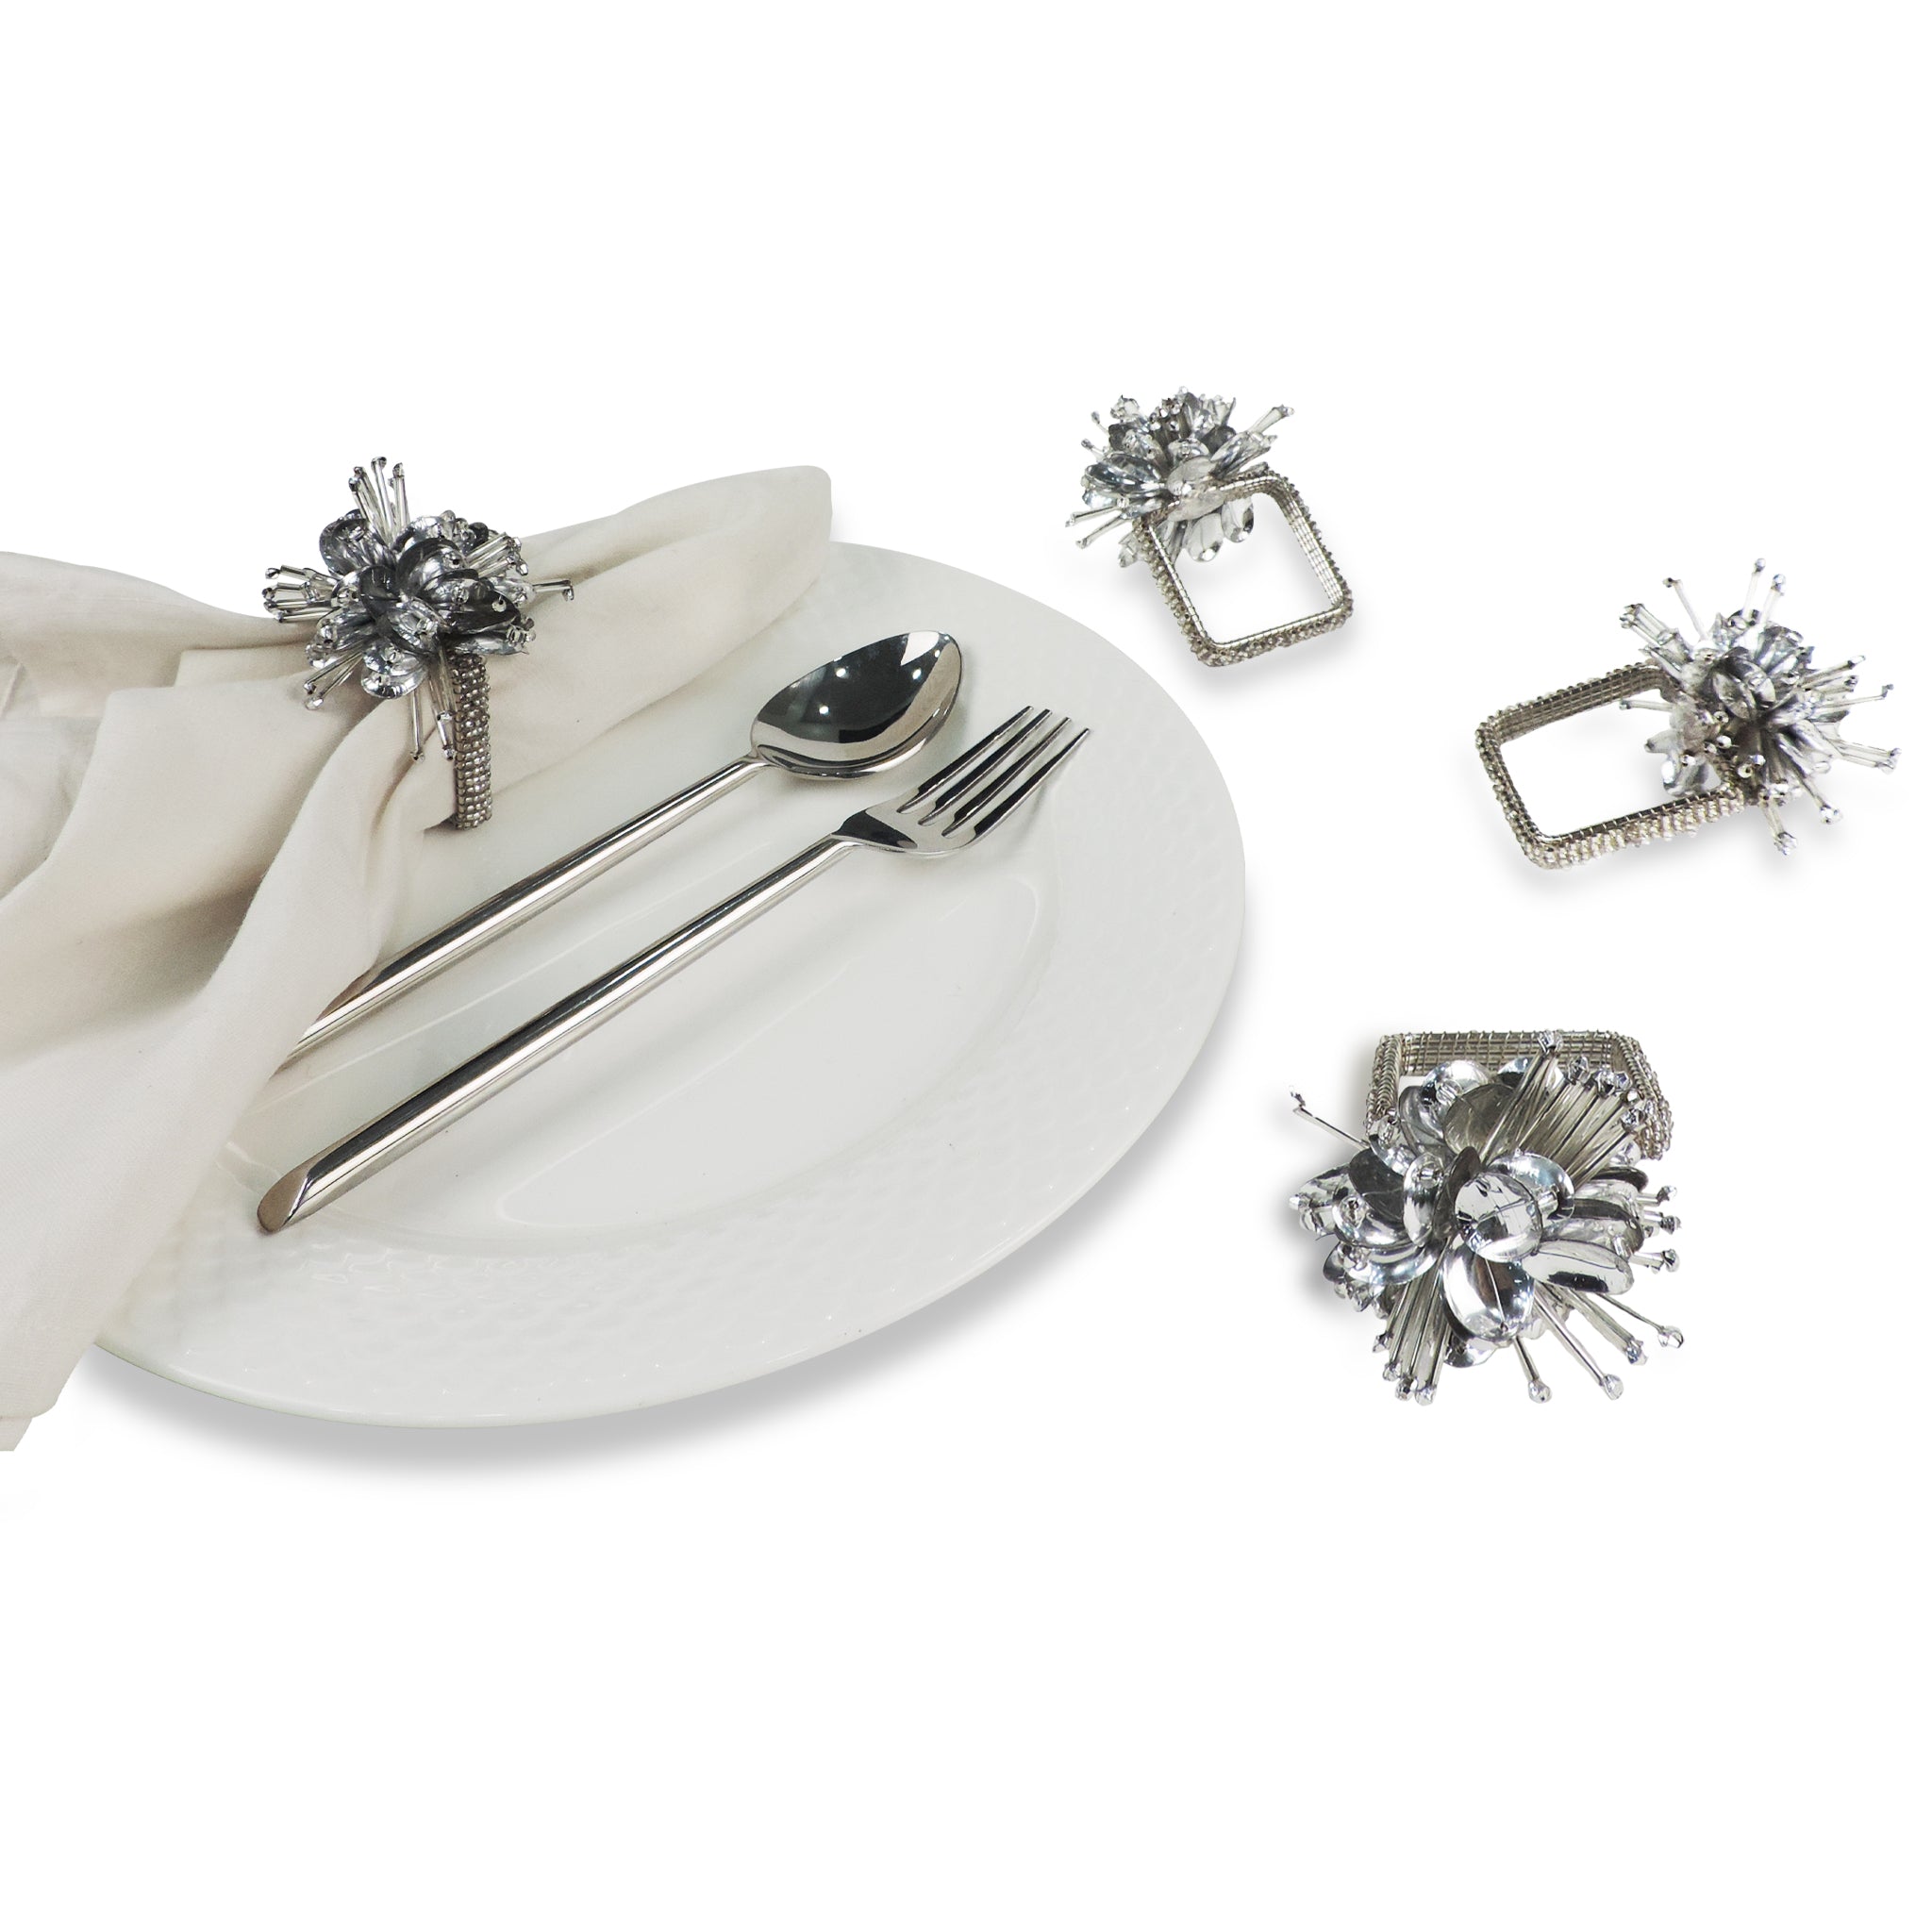 Corsage Napkin Ring Set of 4/ 2"X3" / Set of 4 / Silver